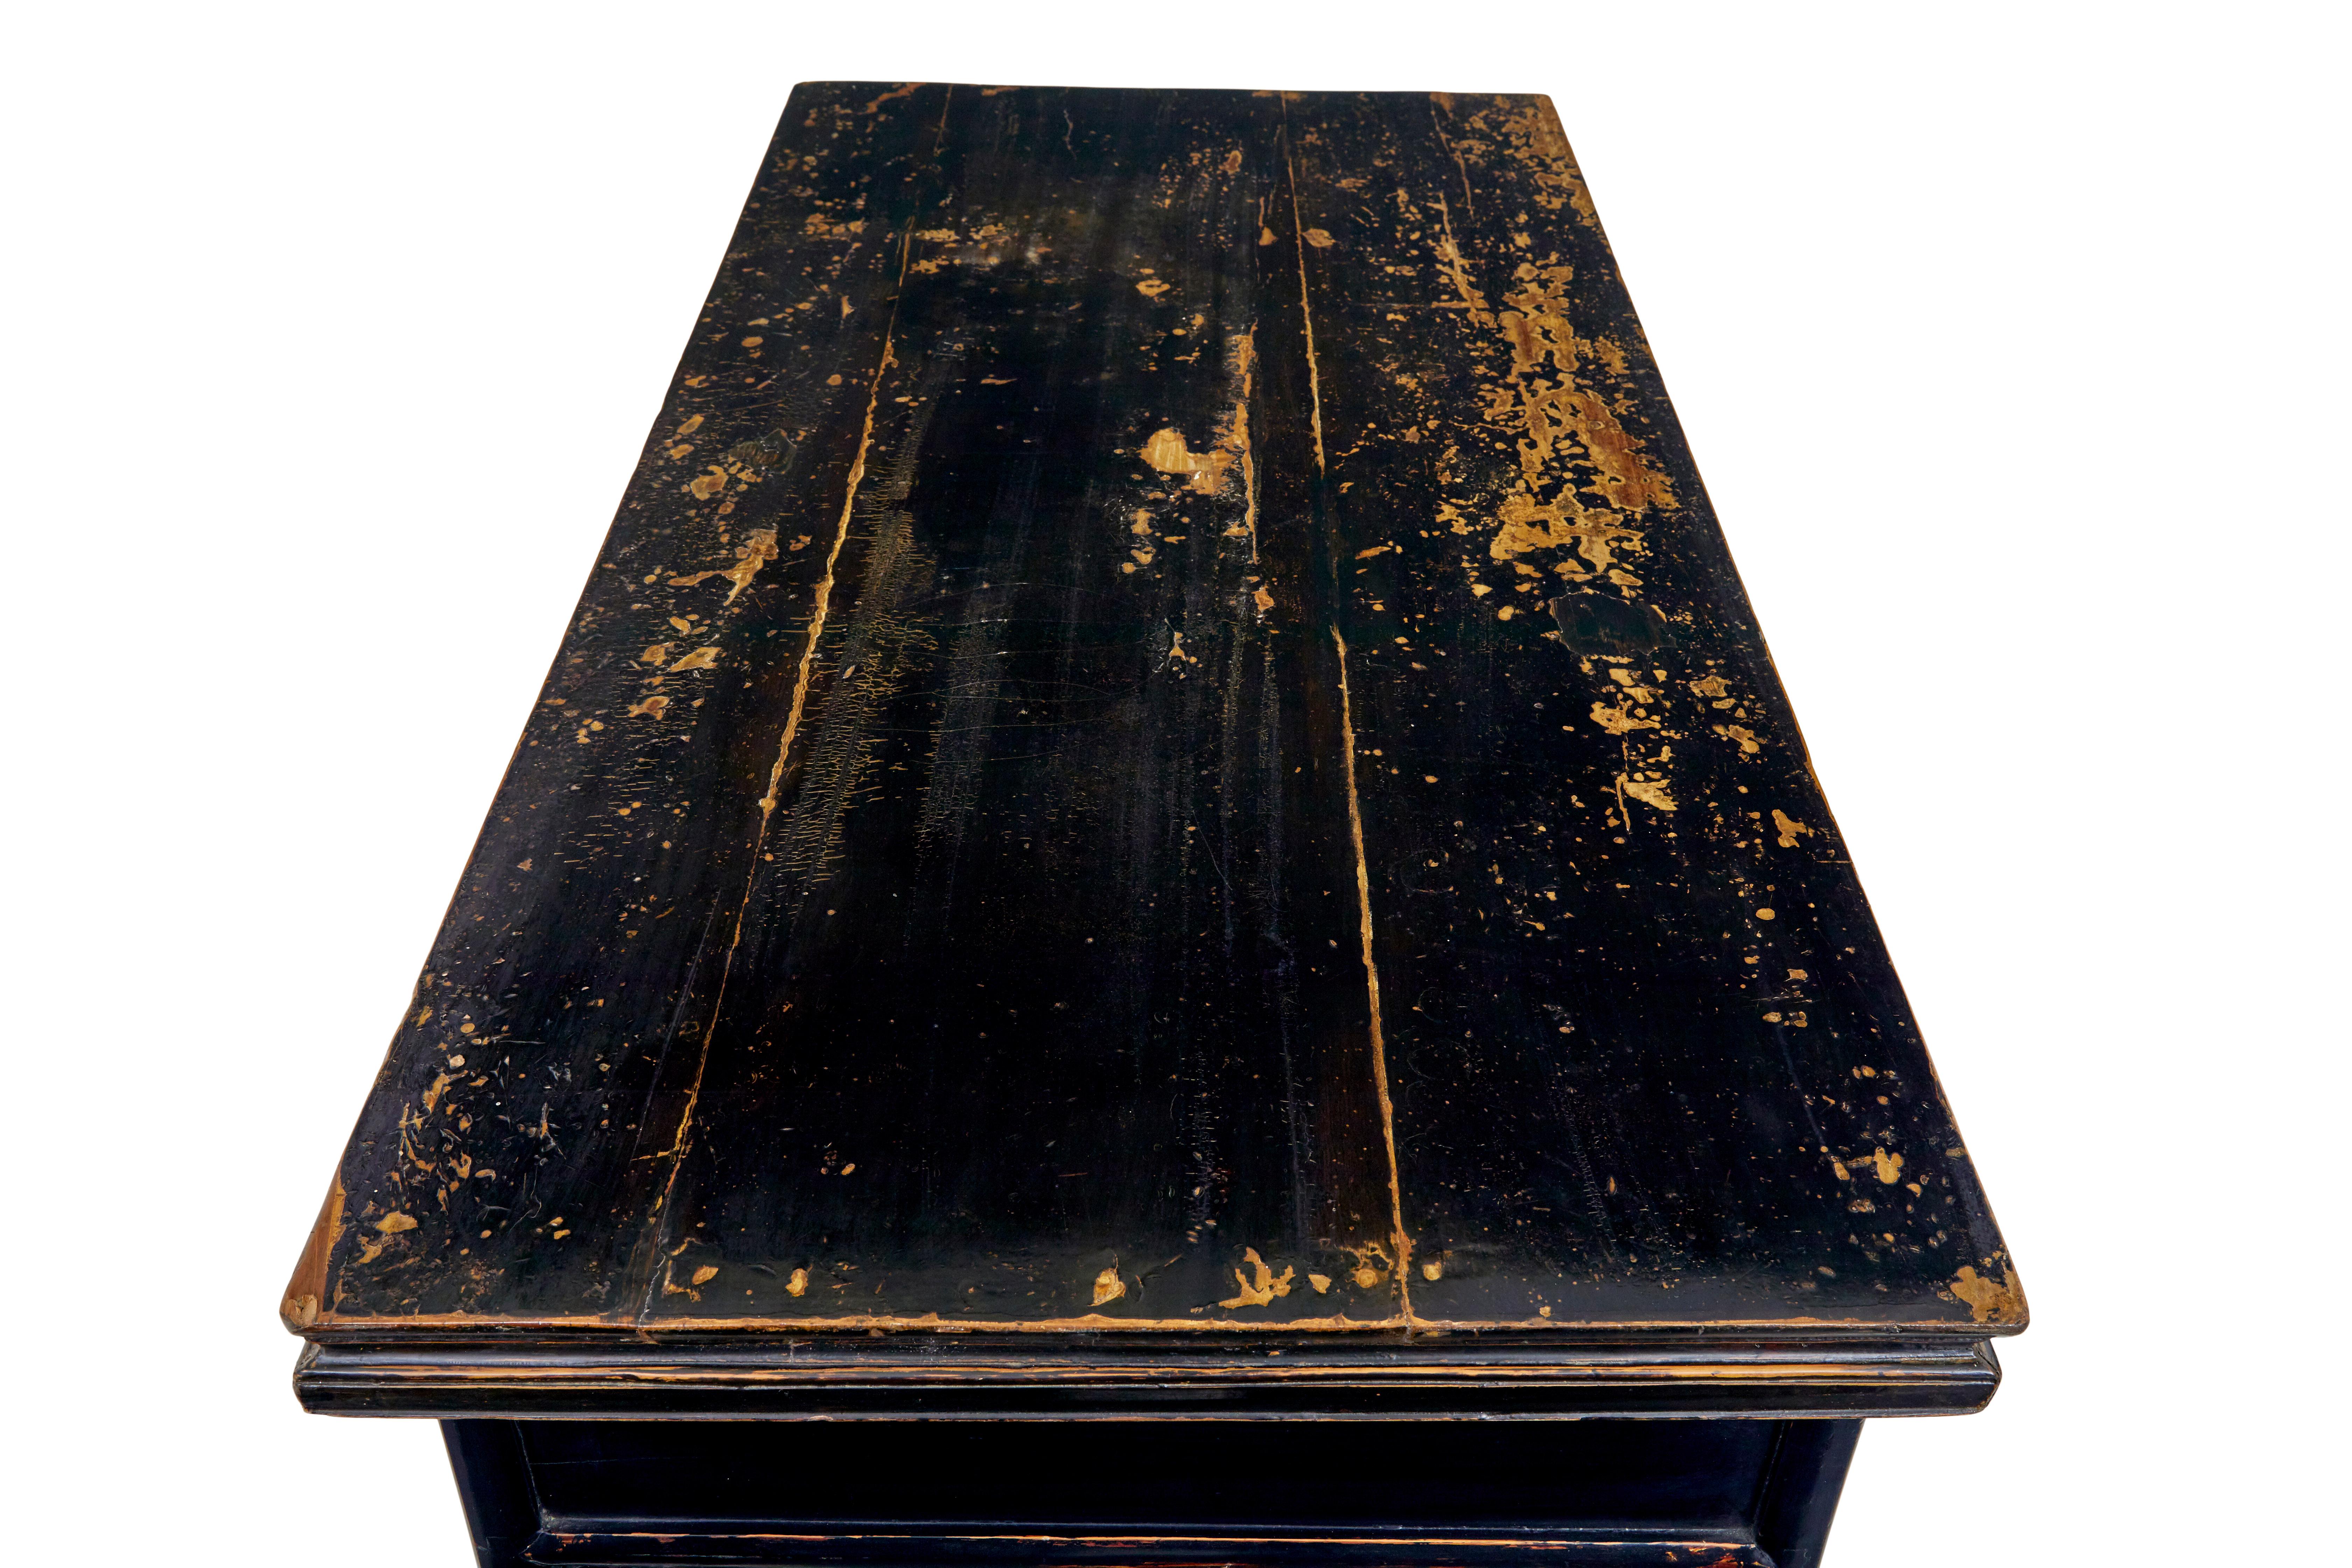 19th century Chinese black lacquered desk circa 1880.

Comprising of 3 parts, 2 pedestals and top surface.  Presented in black lacquer which has worn through.

Now useful as a desk with a drawer in each pedestal and lower pierced carved shelf. 